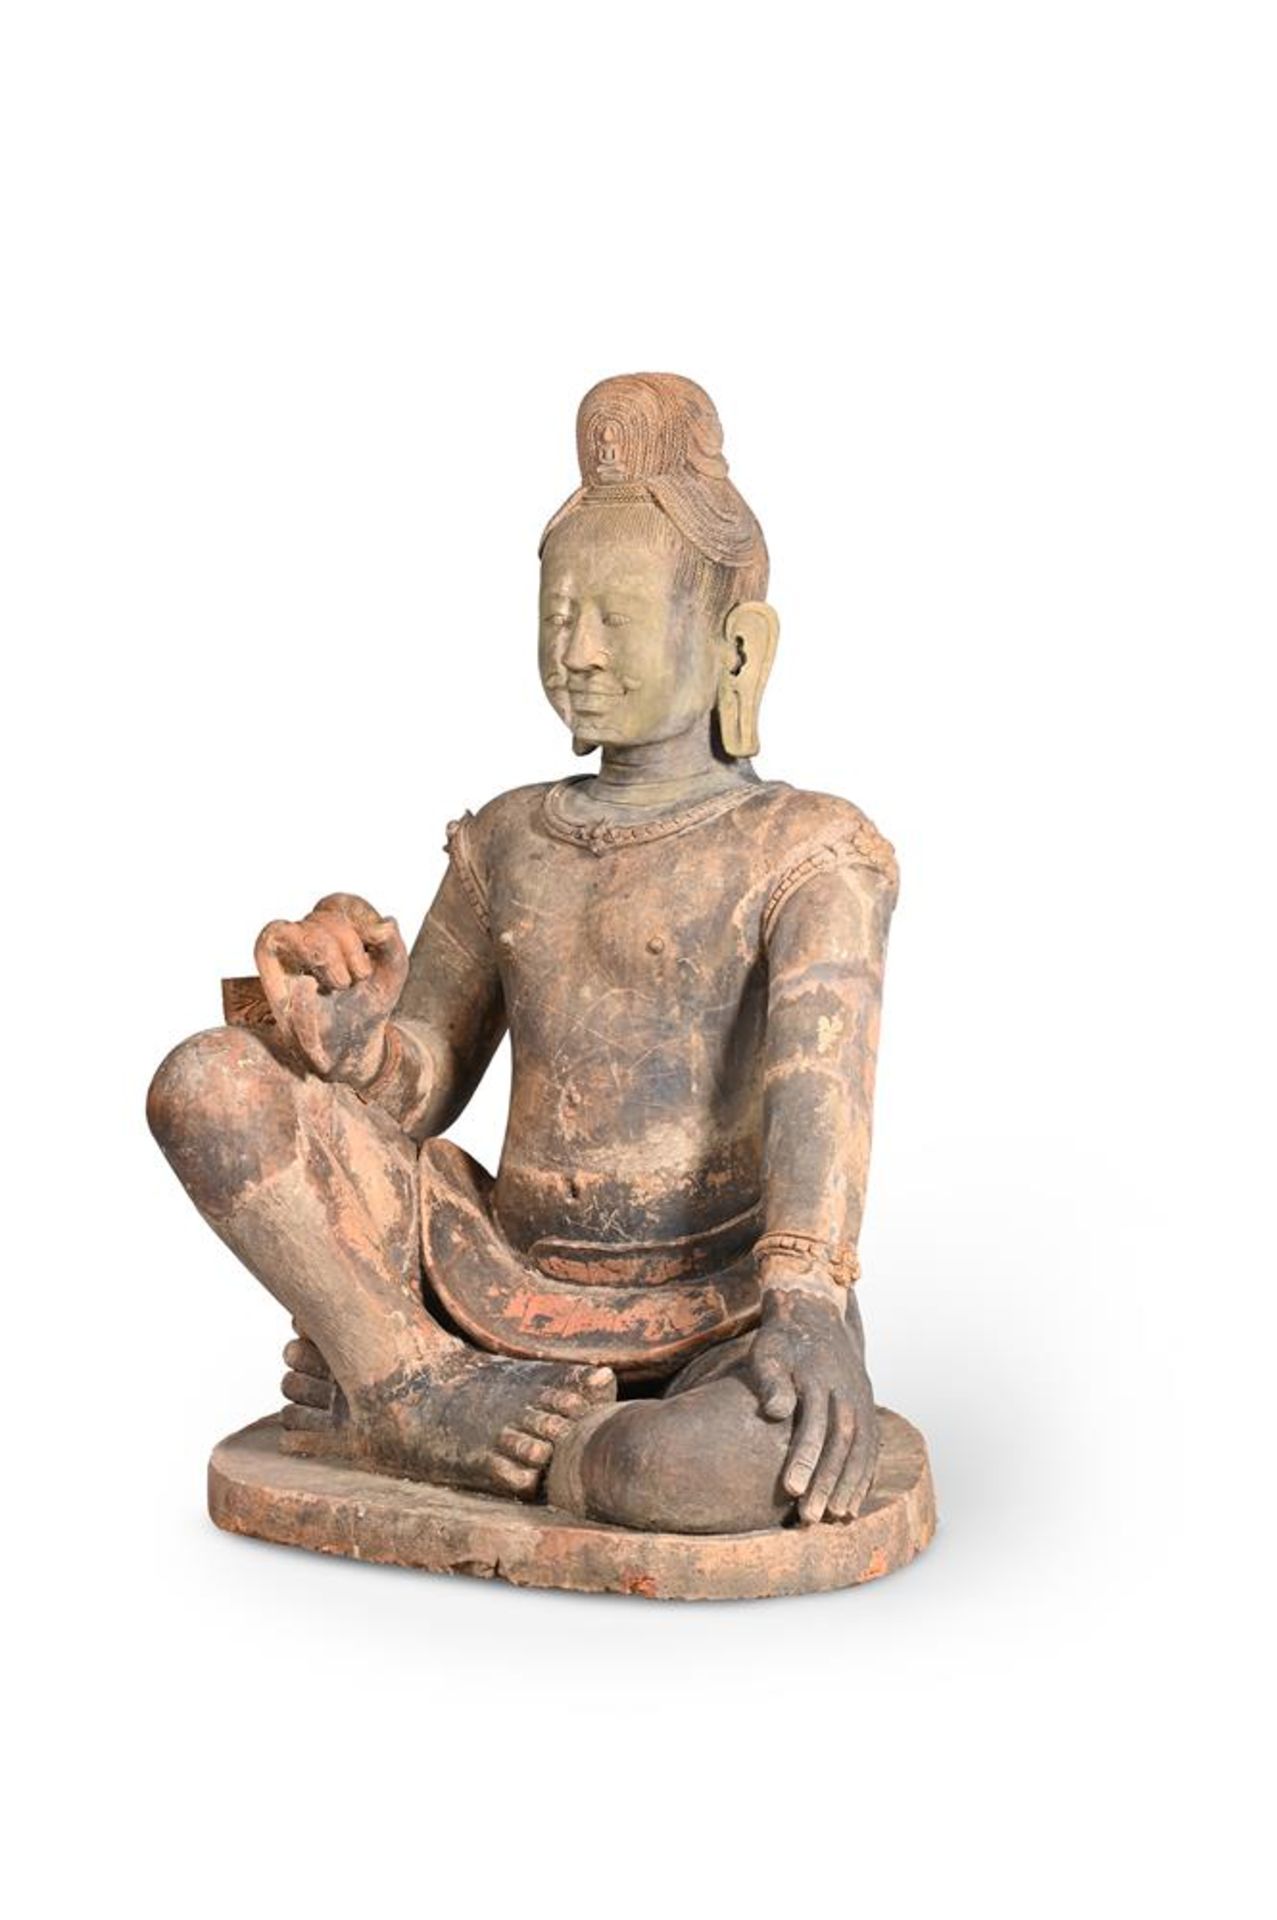 A LARGE TERRACOTTA SEATED FIGURE OF A MALE DEITY, PROBABLY 19TH OR EARLY 20TH CENTURY - Image 2 of 3